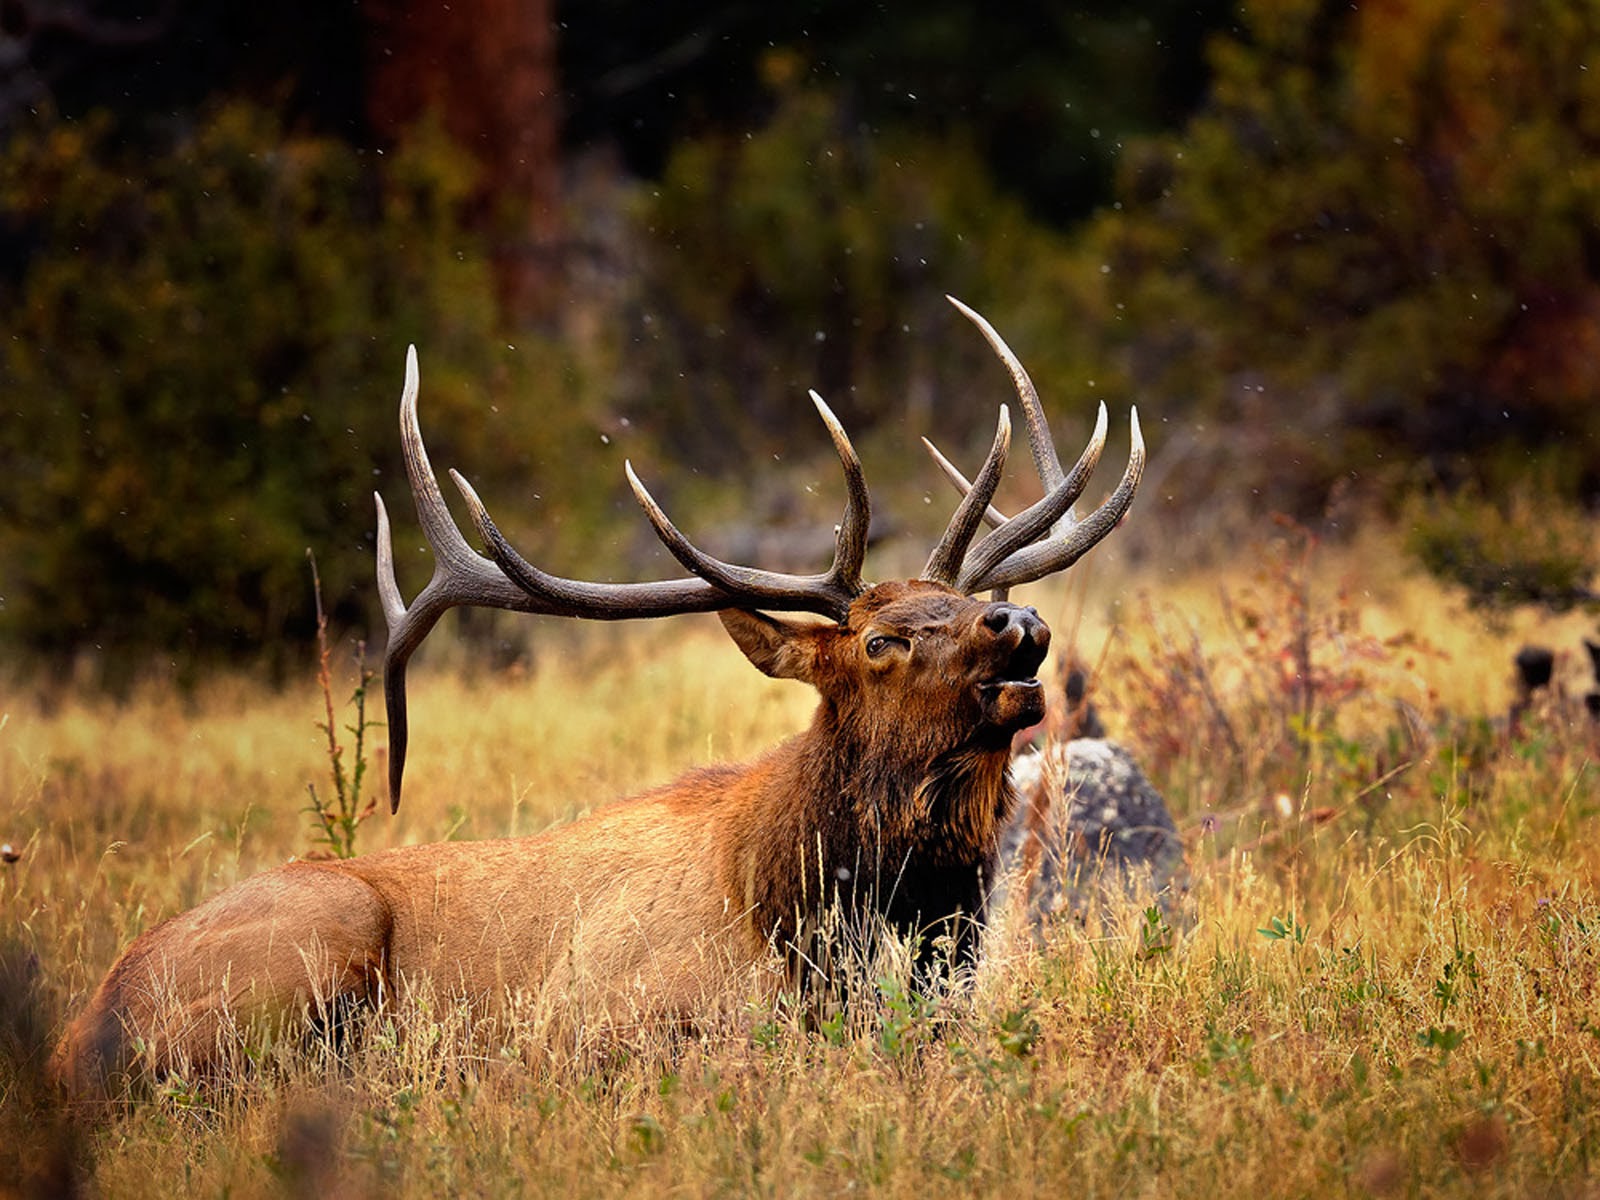 Tag Elk Wallpaper Background Photos Image Andpictures For